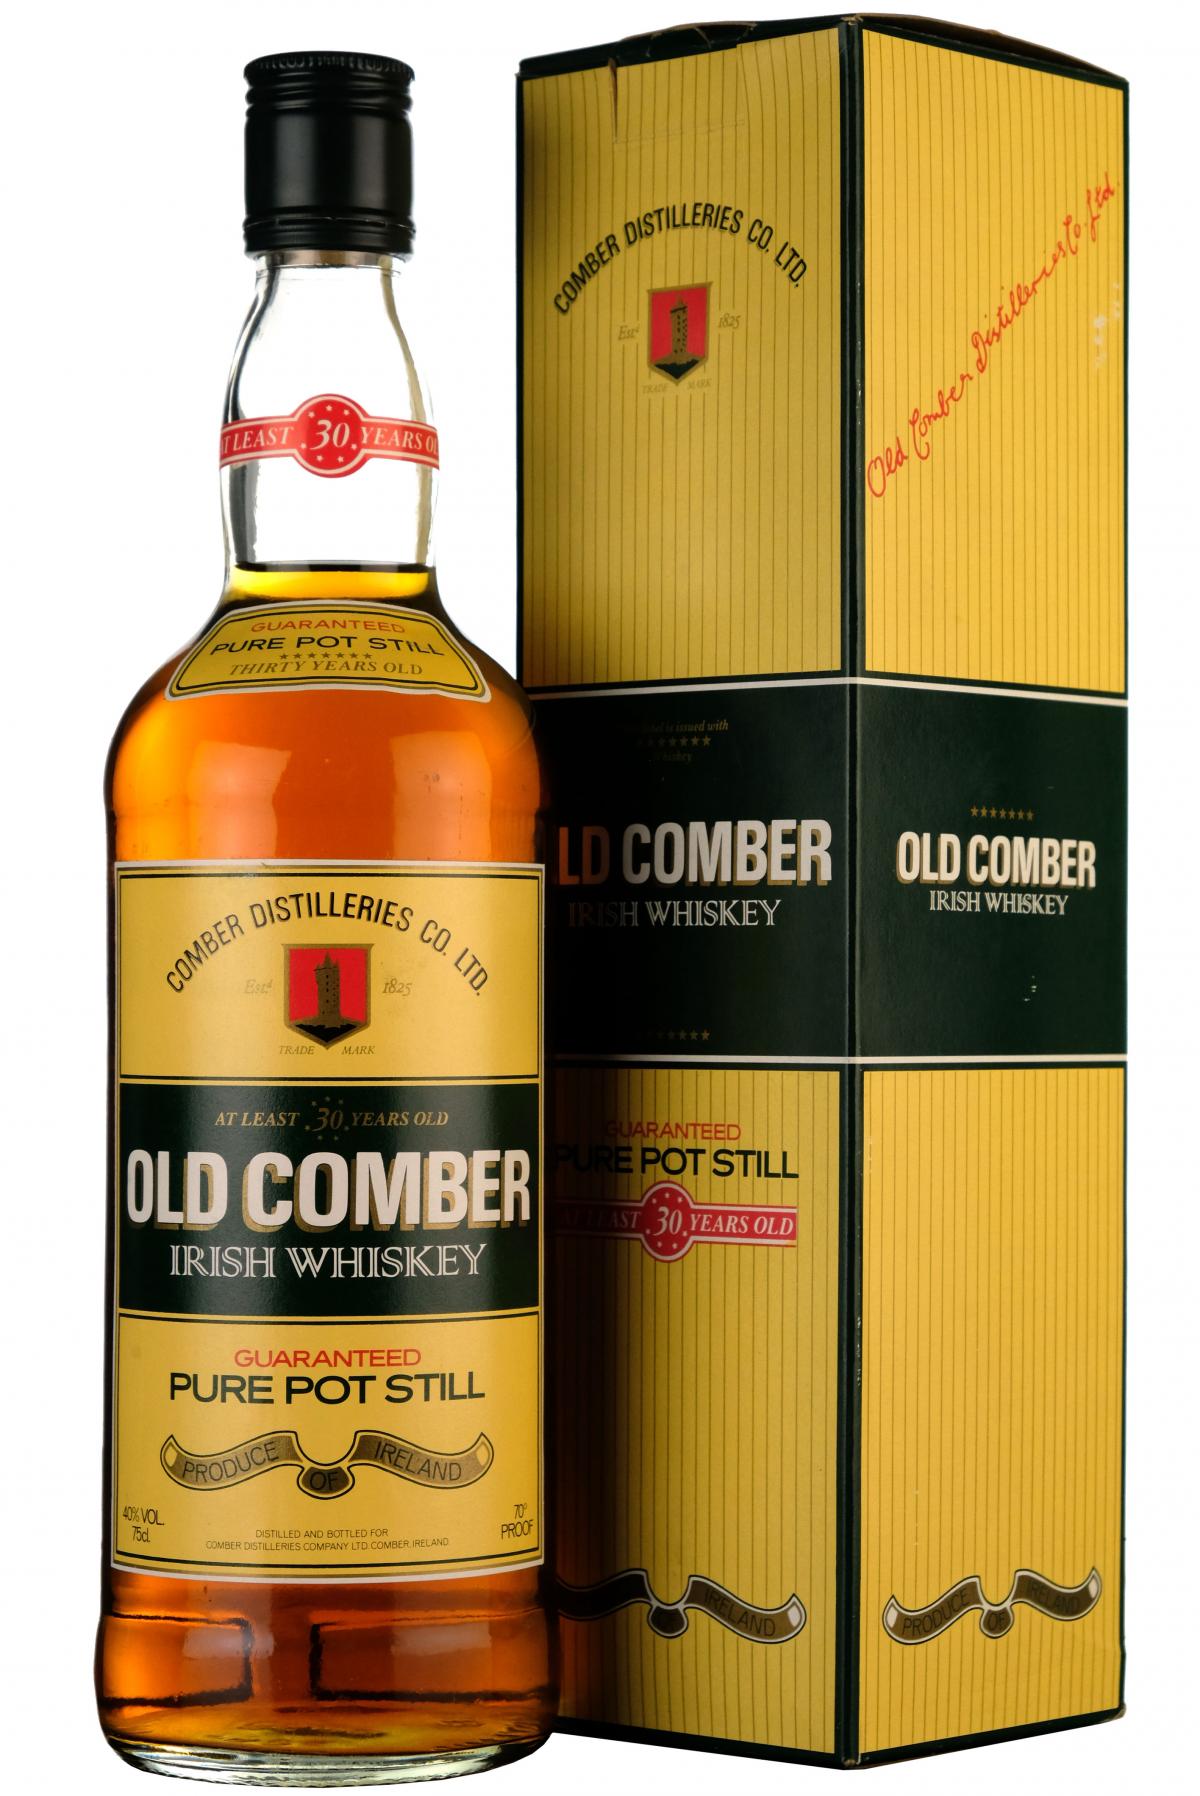 old comber 30 year old, irish whiskey